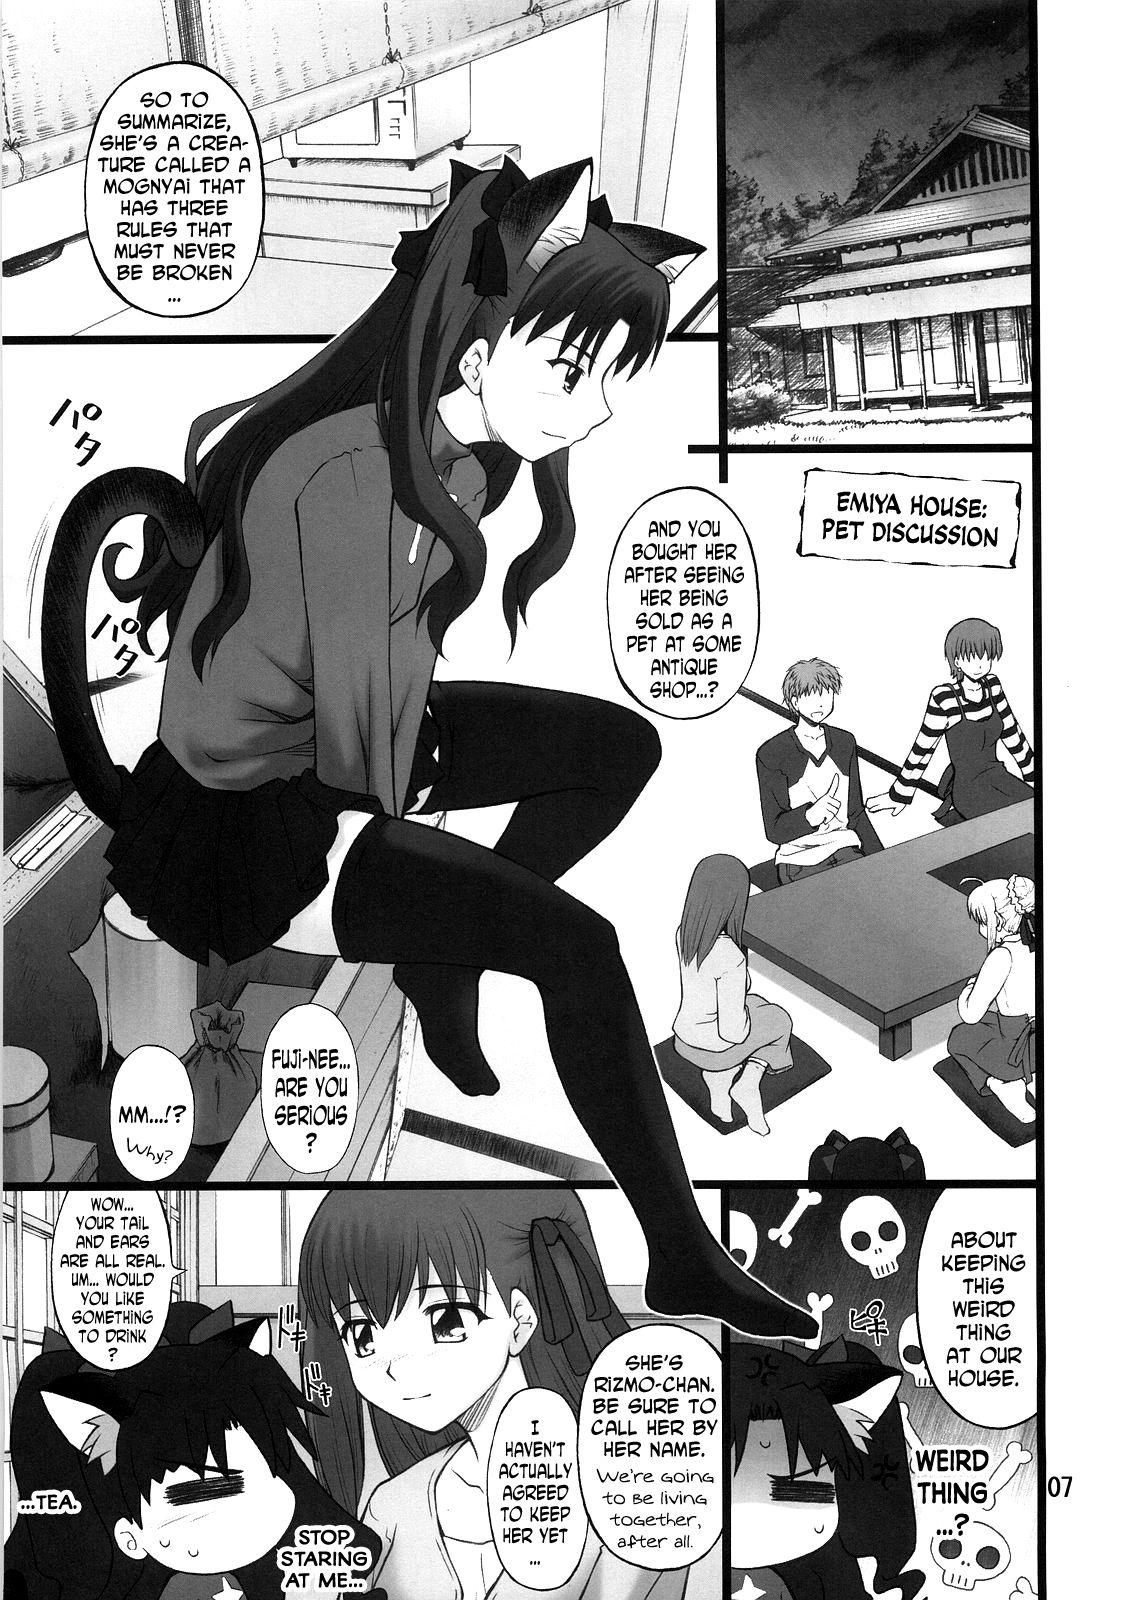 Magrinha Grem-Rin 1 - Fate stay night Sloppy - Page 6